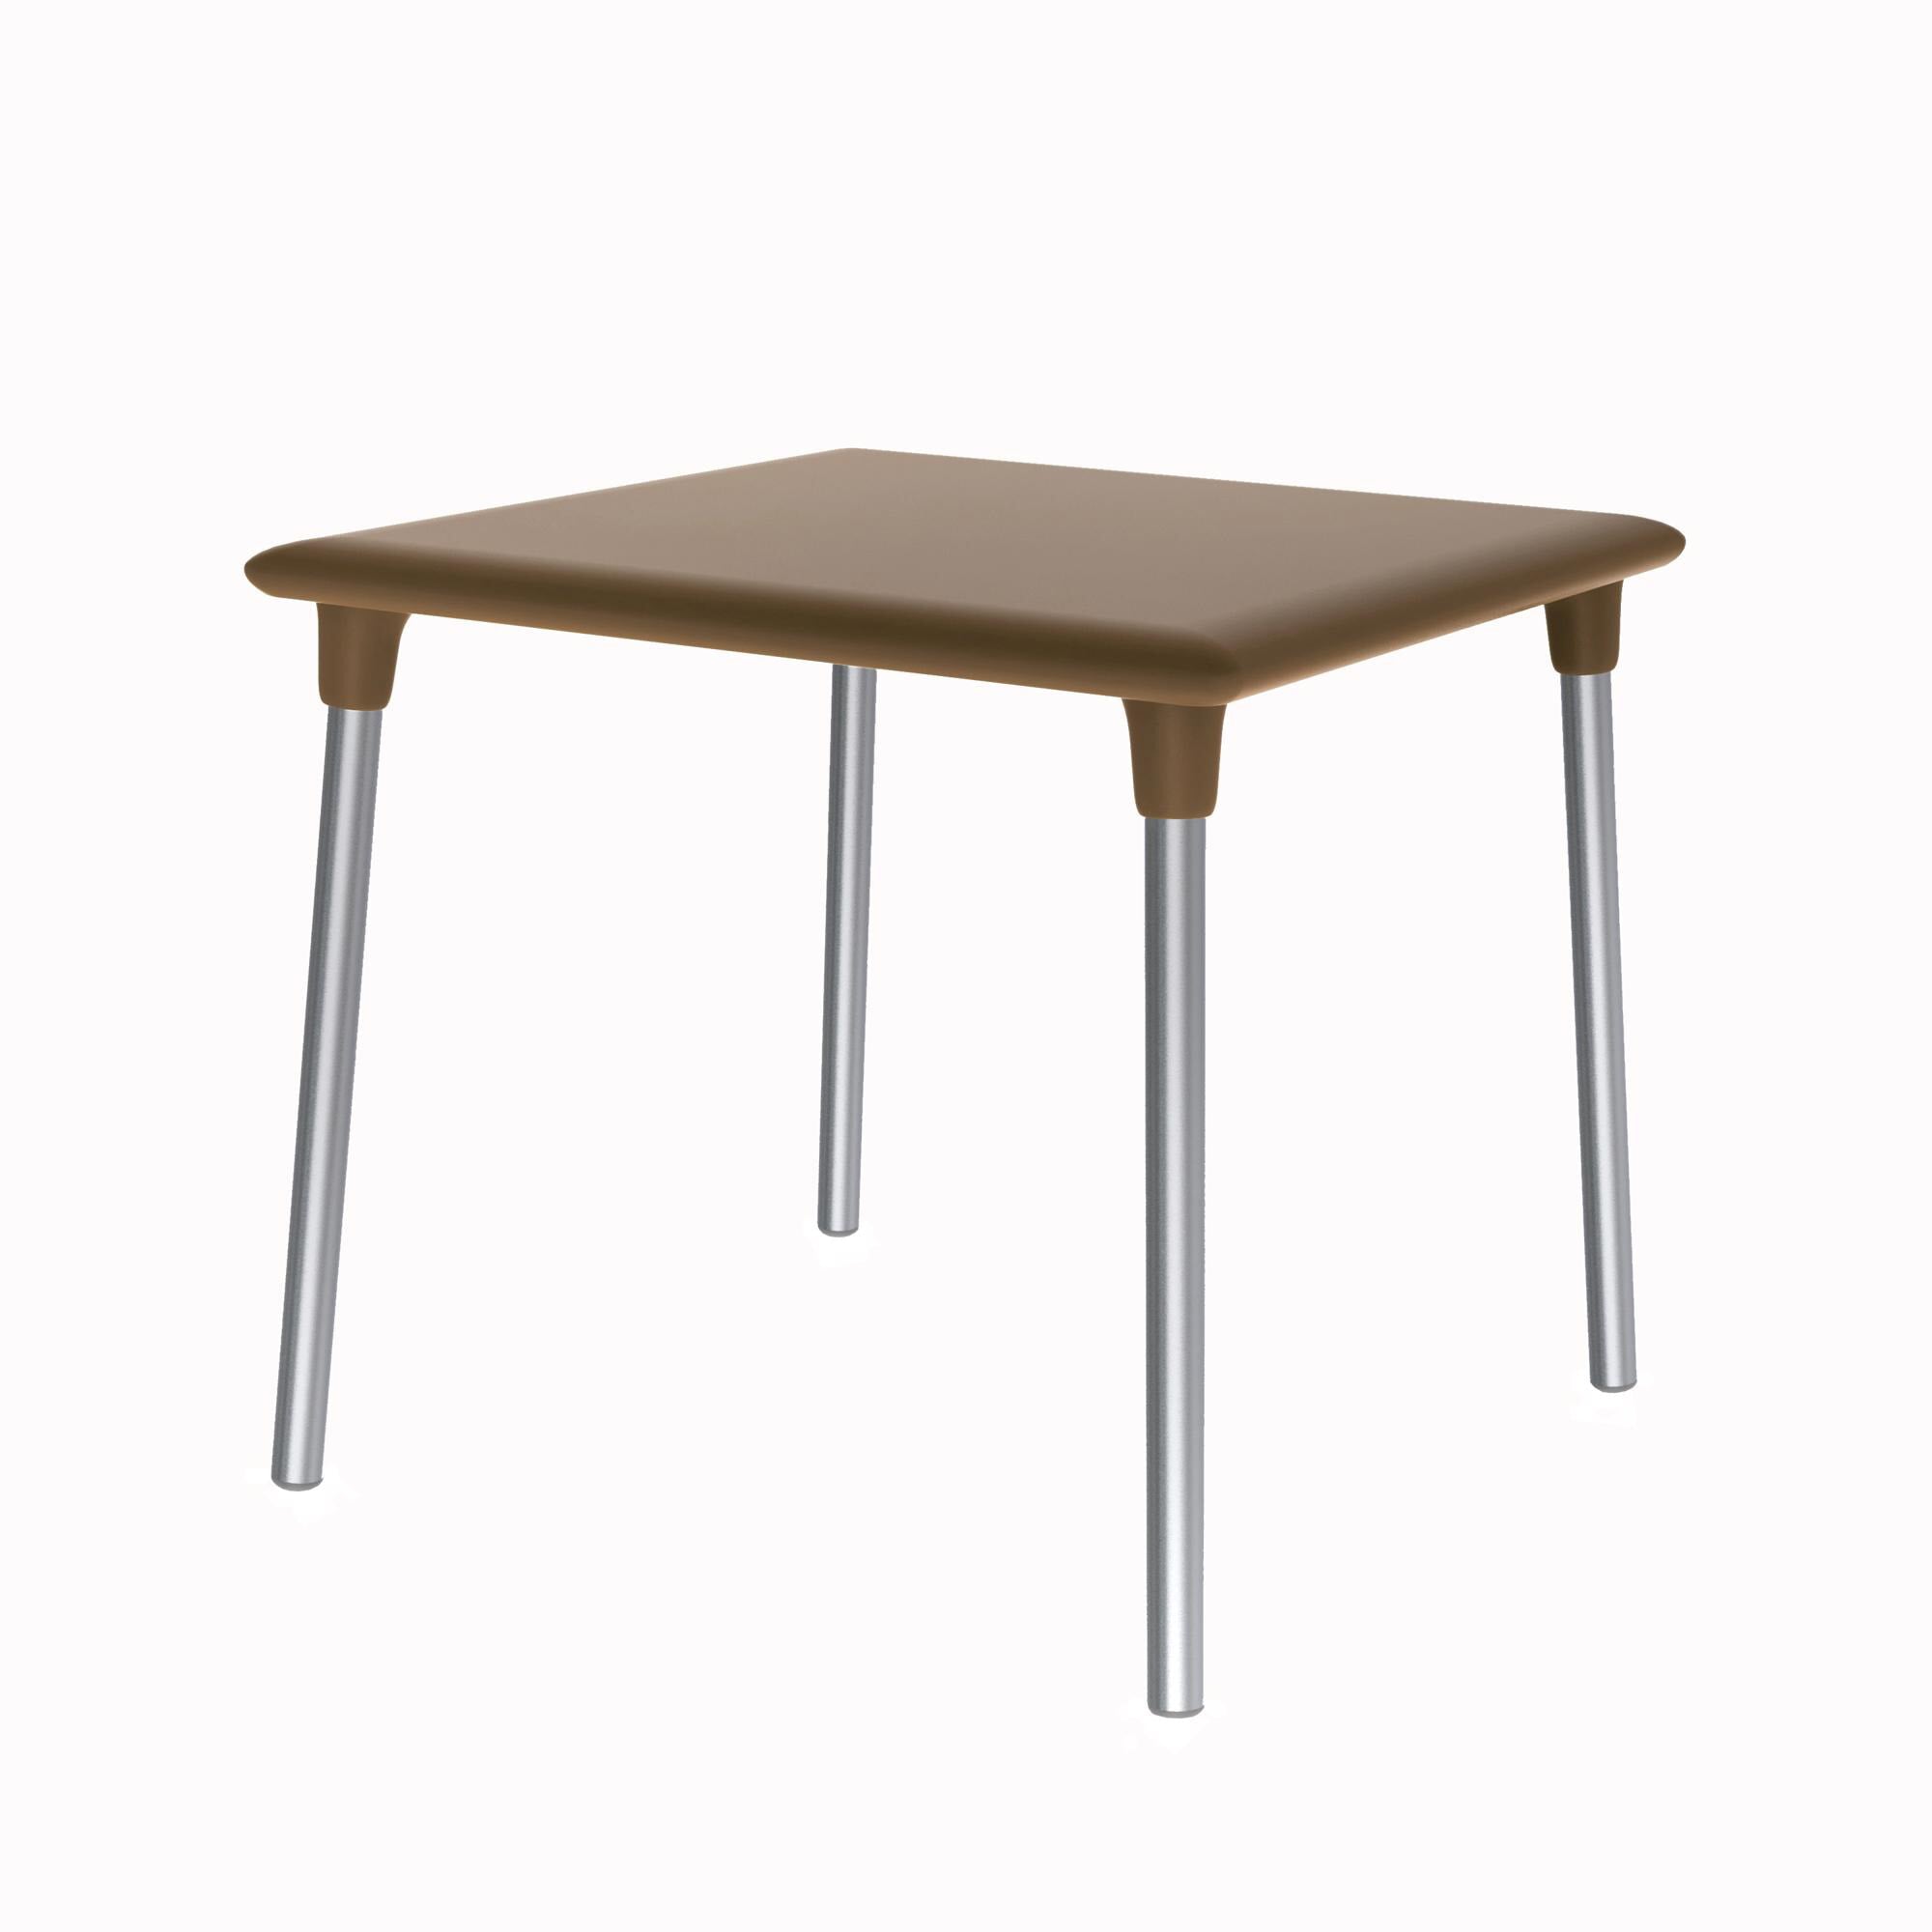 Resol new flash square table inside, outside 90x90 chocolate